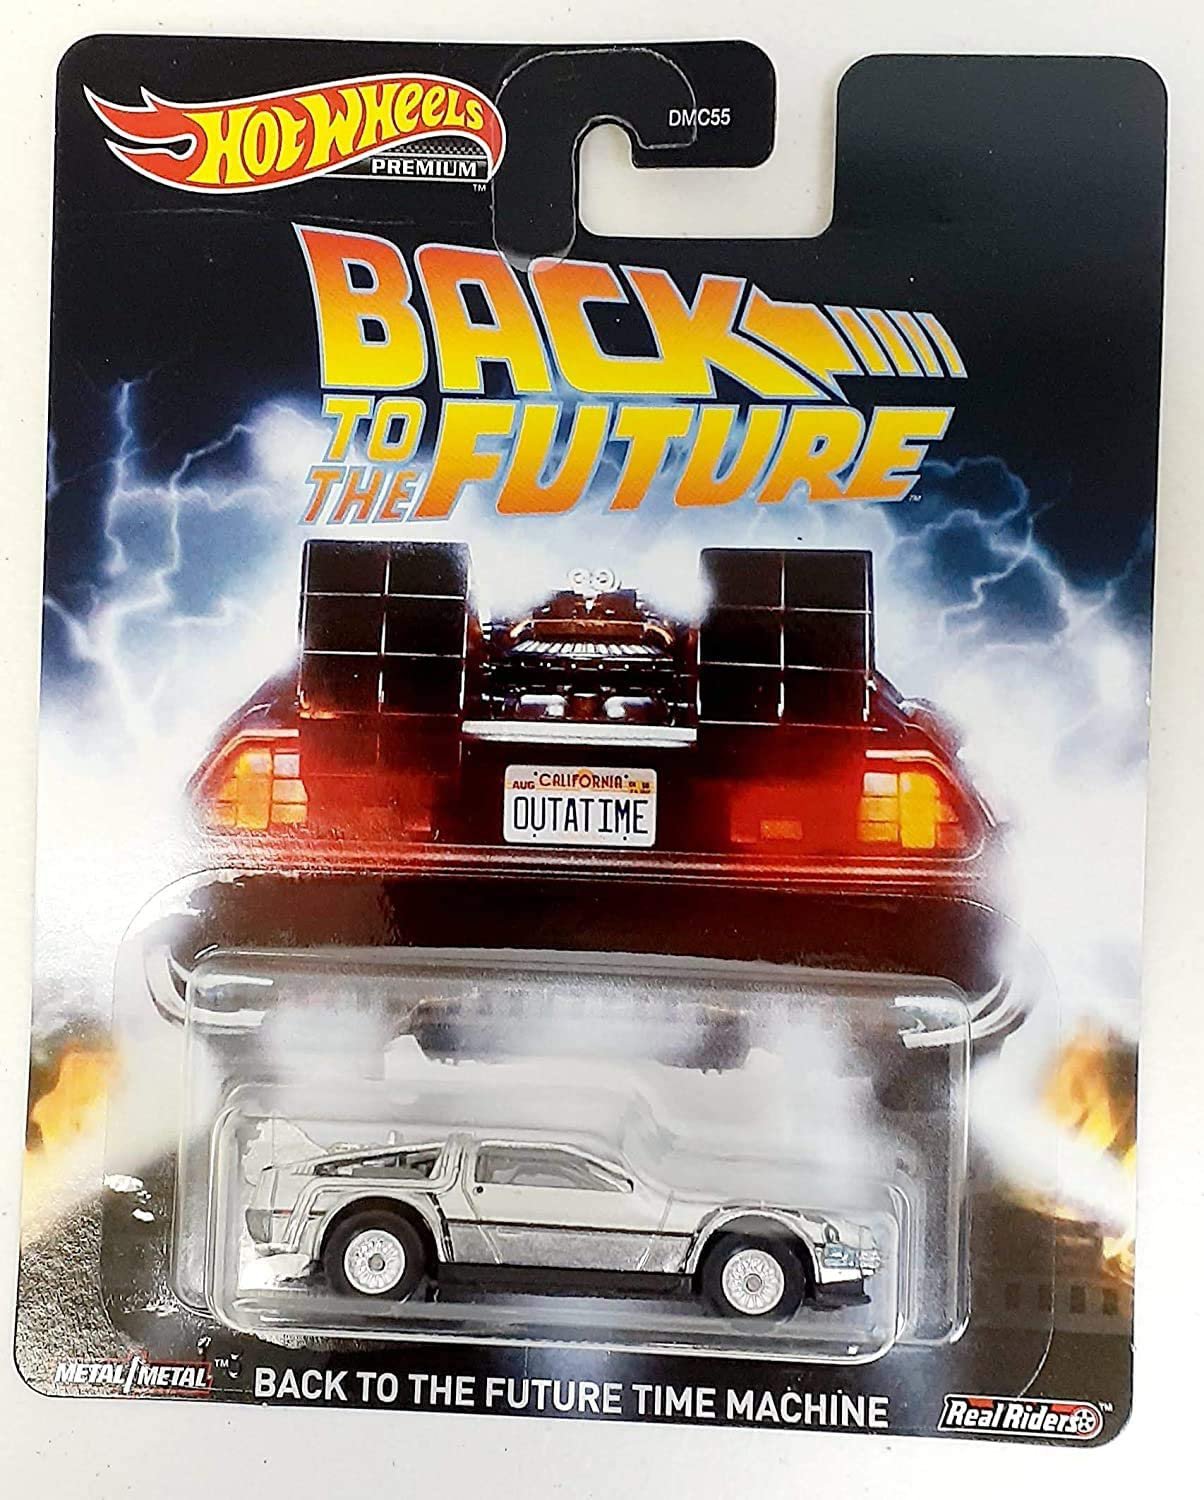 Hot Wheels Premium Back to The Future Time Machine Real Riders